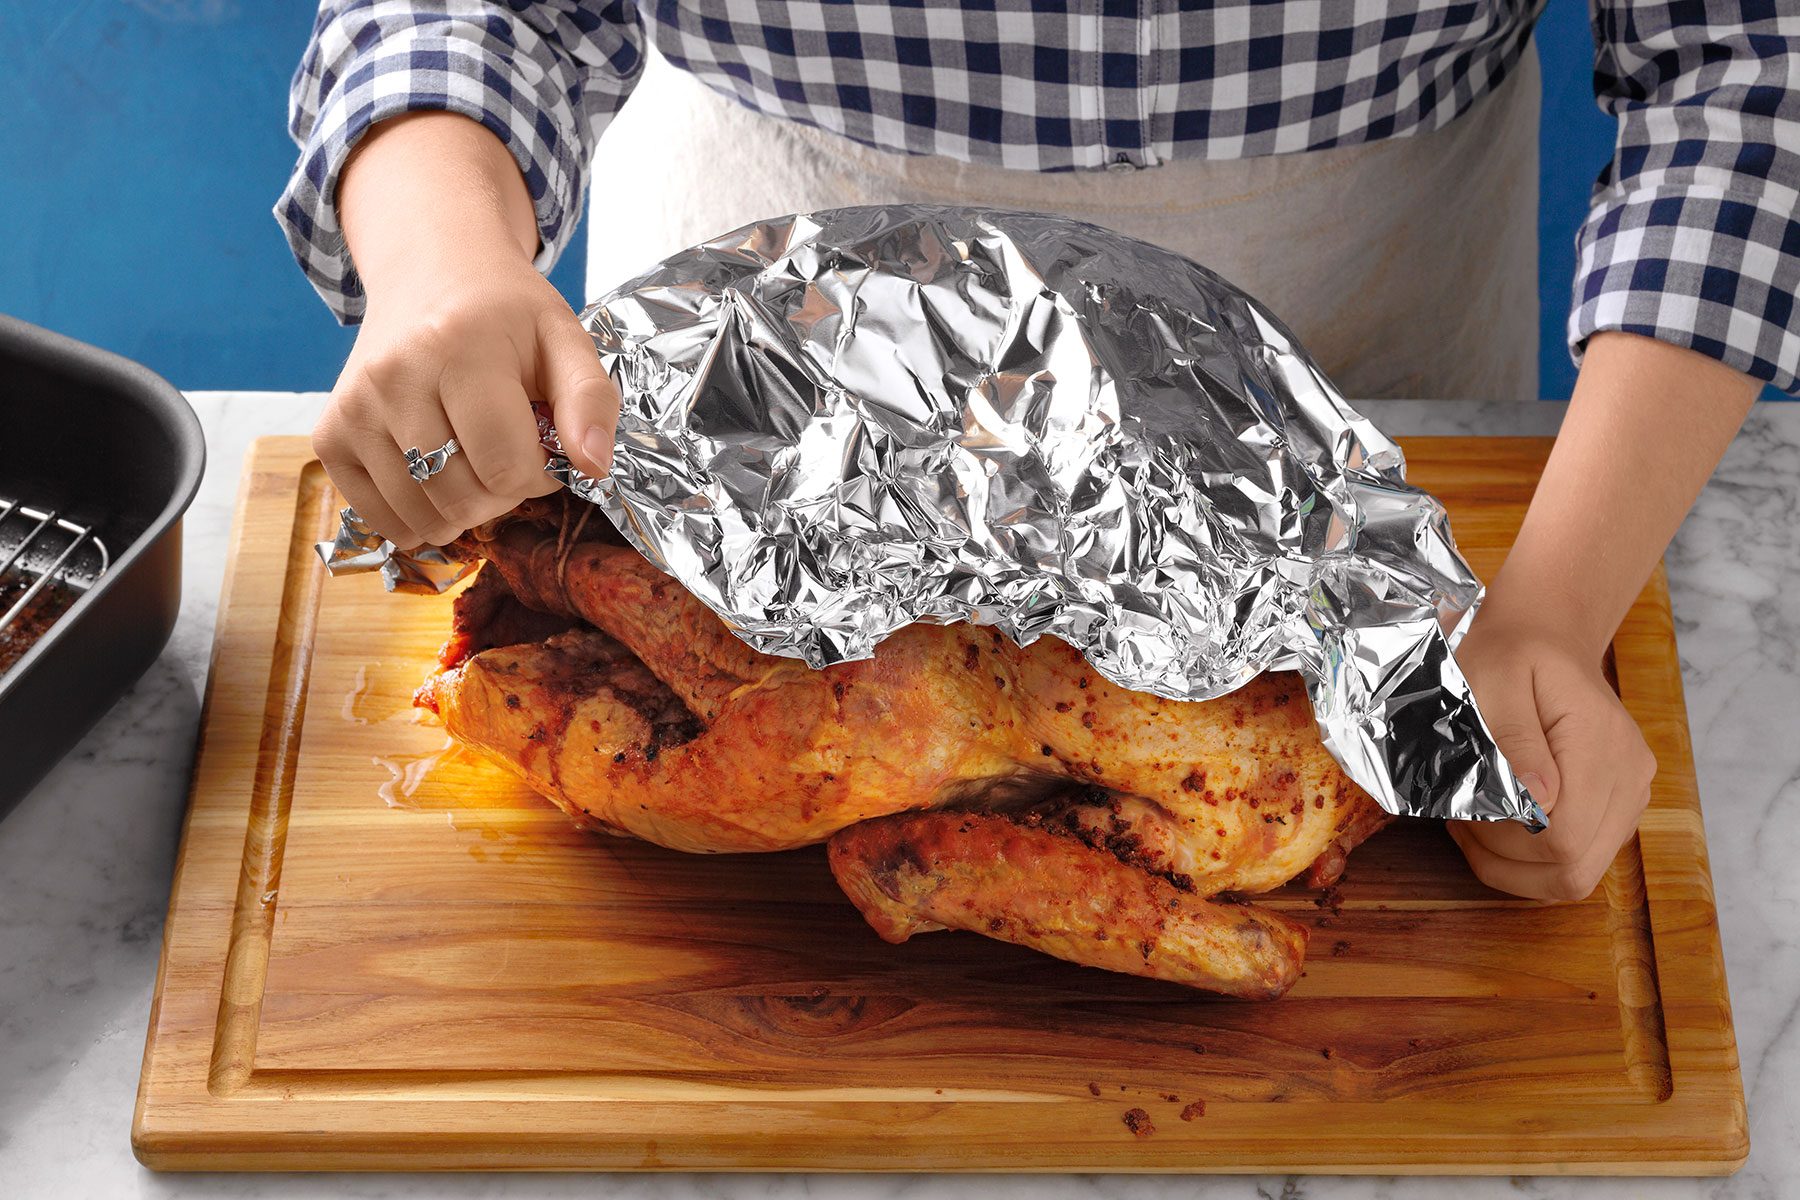 Covering Turkey with Foil